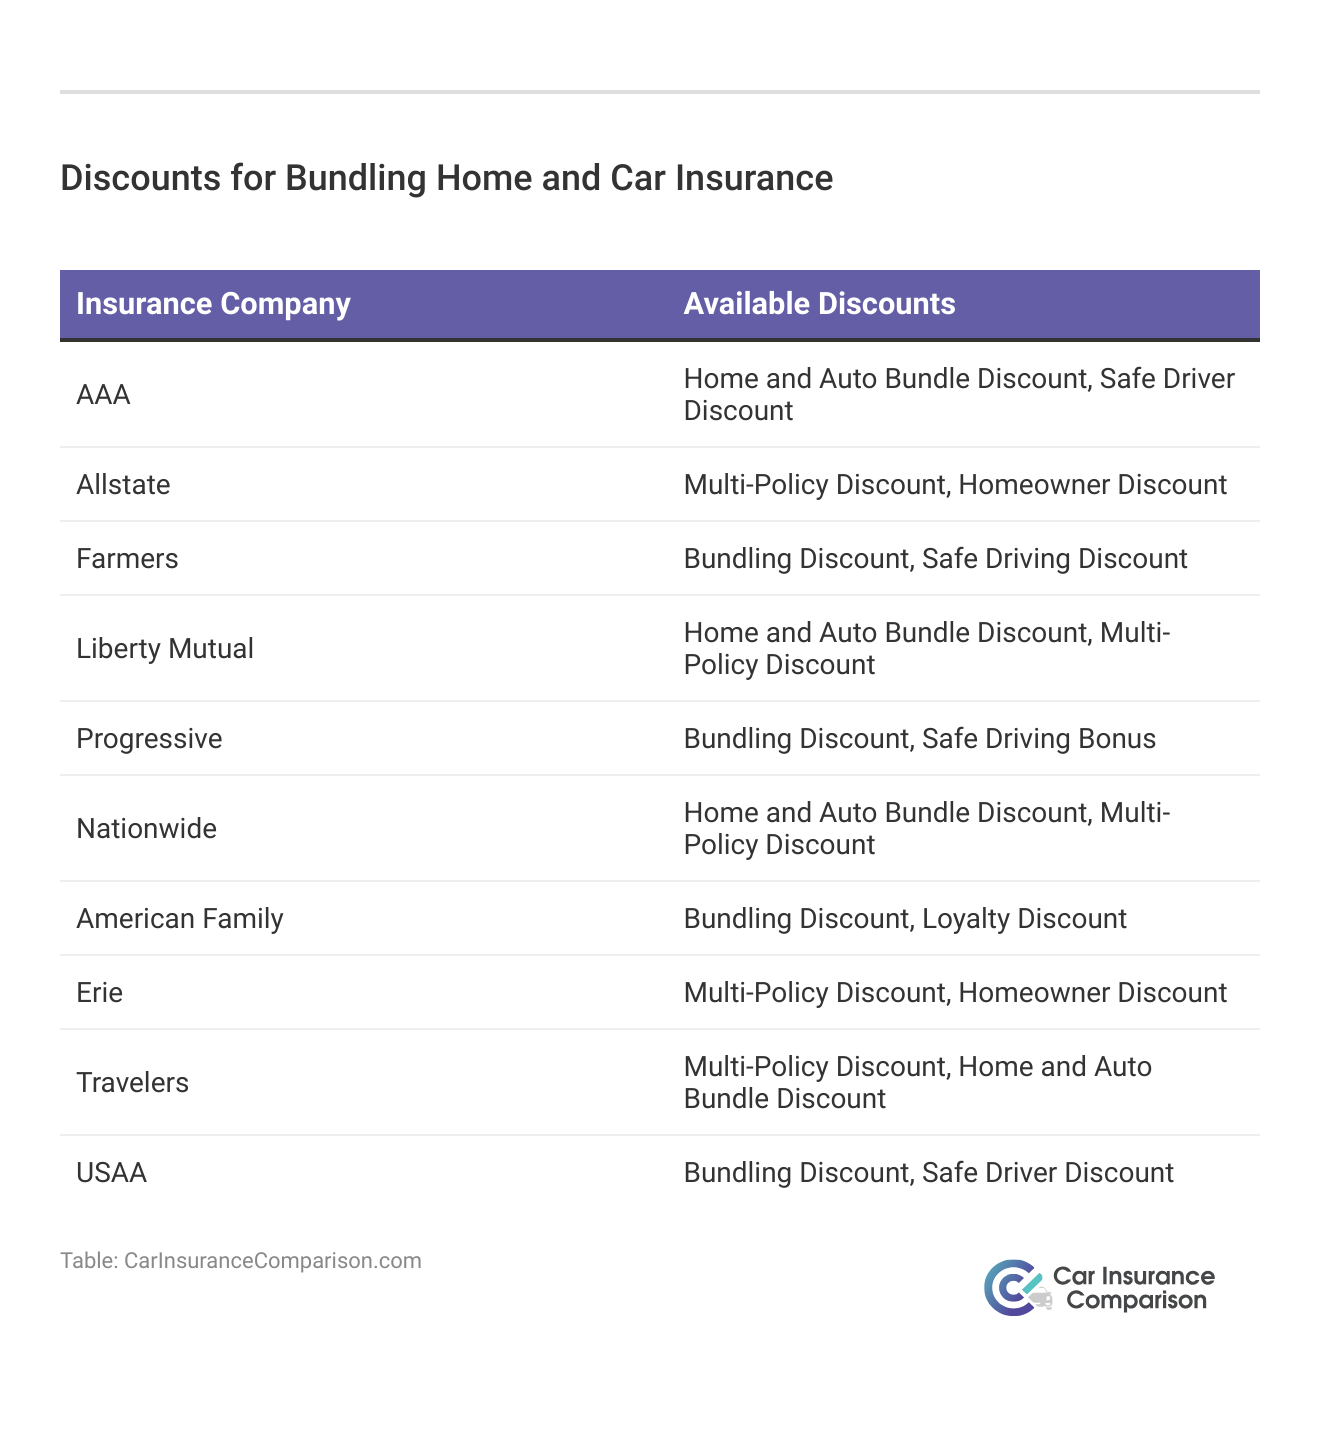 <h3>Discounts for Bundling Home and Car Insurance</h3>